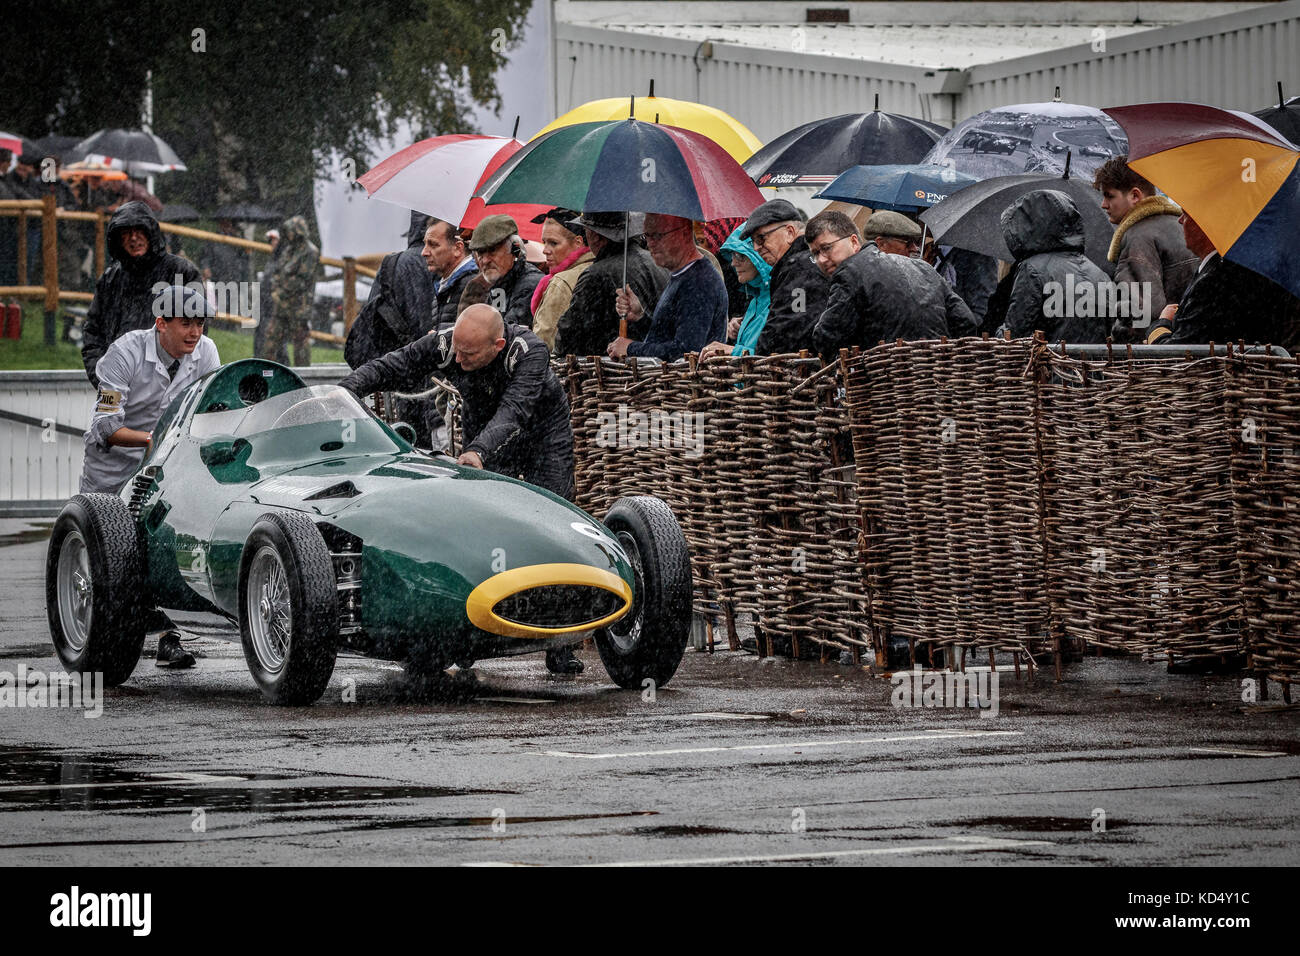 1957 Vanwall F1 car is pushed into the paddock from the British 1957 Grand Prix Celebration with heavy rain, at the 2017 Goodwood Revival, Sussex, UK. Stock Photo